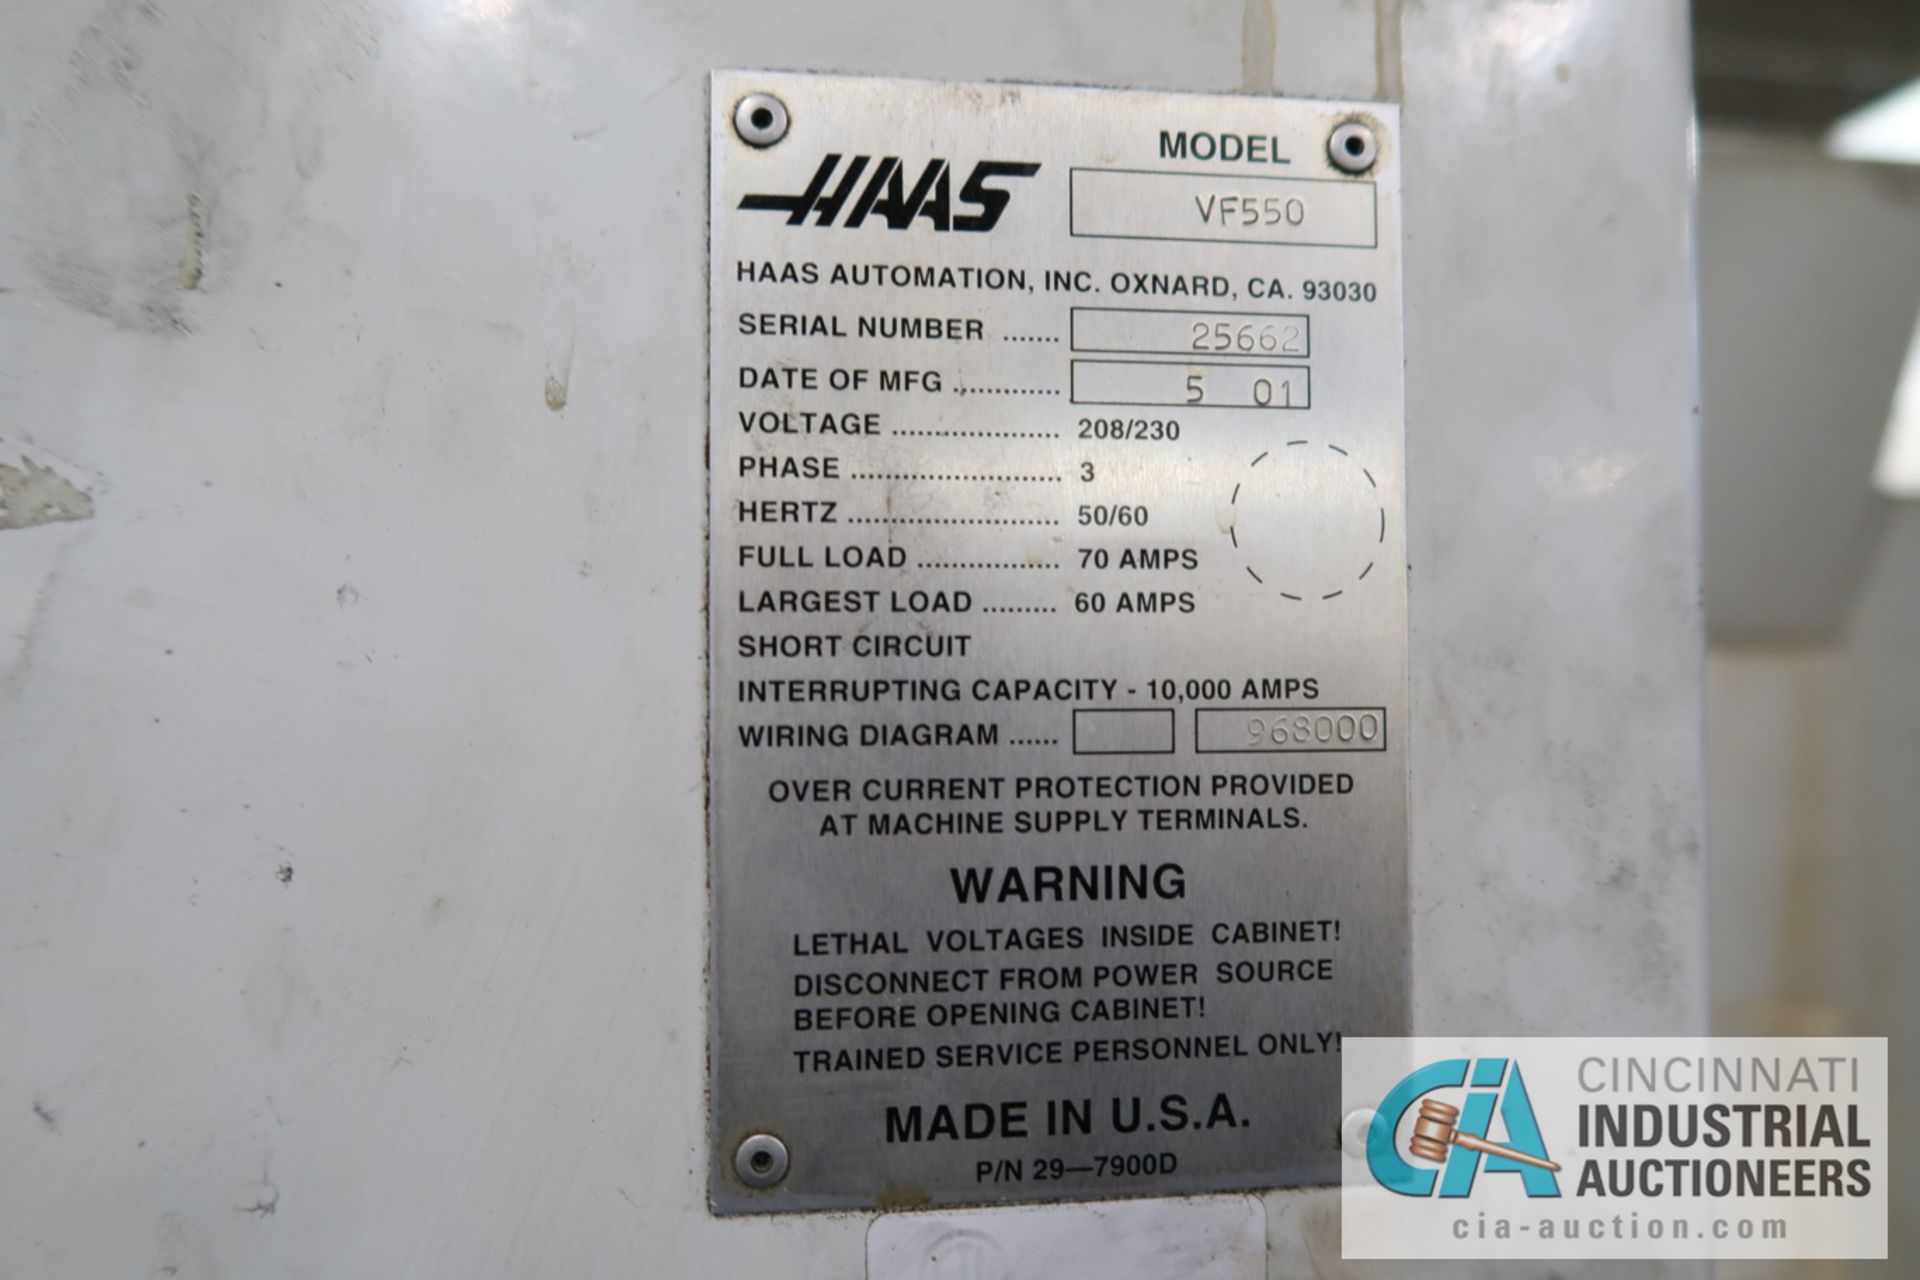 HAAS MODEL VF5/50 CNC VERTICAL MACHINING CENTER; S/N 25662, 23" X 50" TABLE, 50 TAPER SPINDLE, 30- - Image 4 of 17